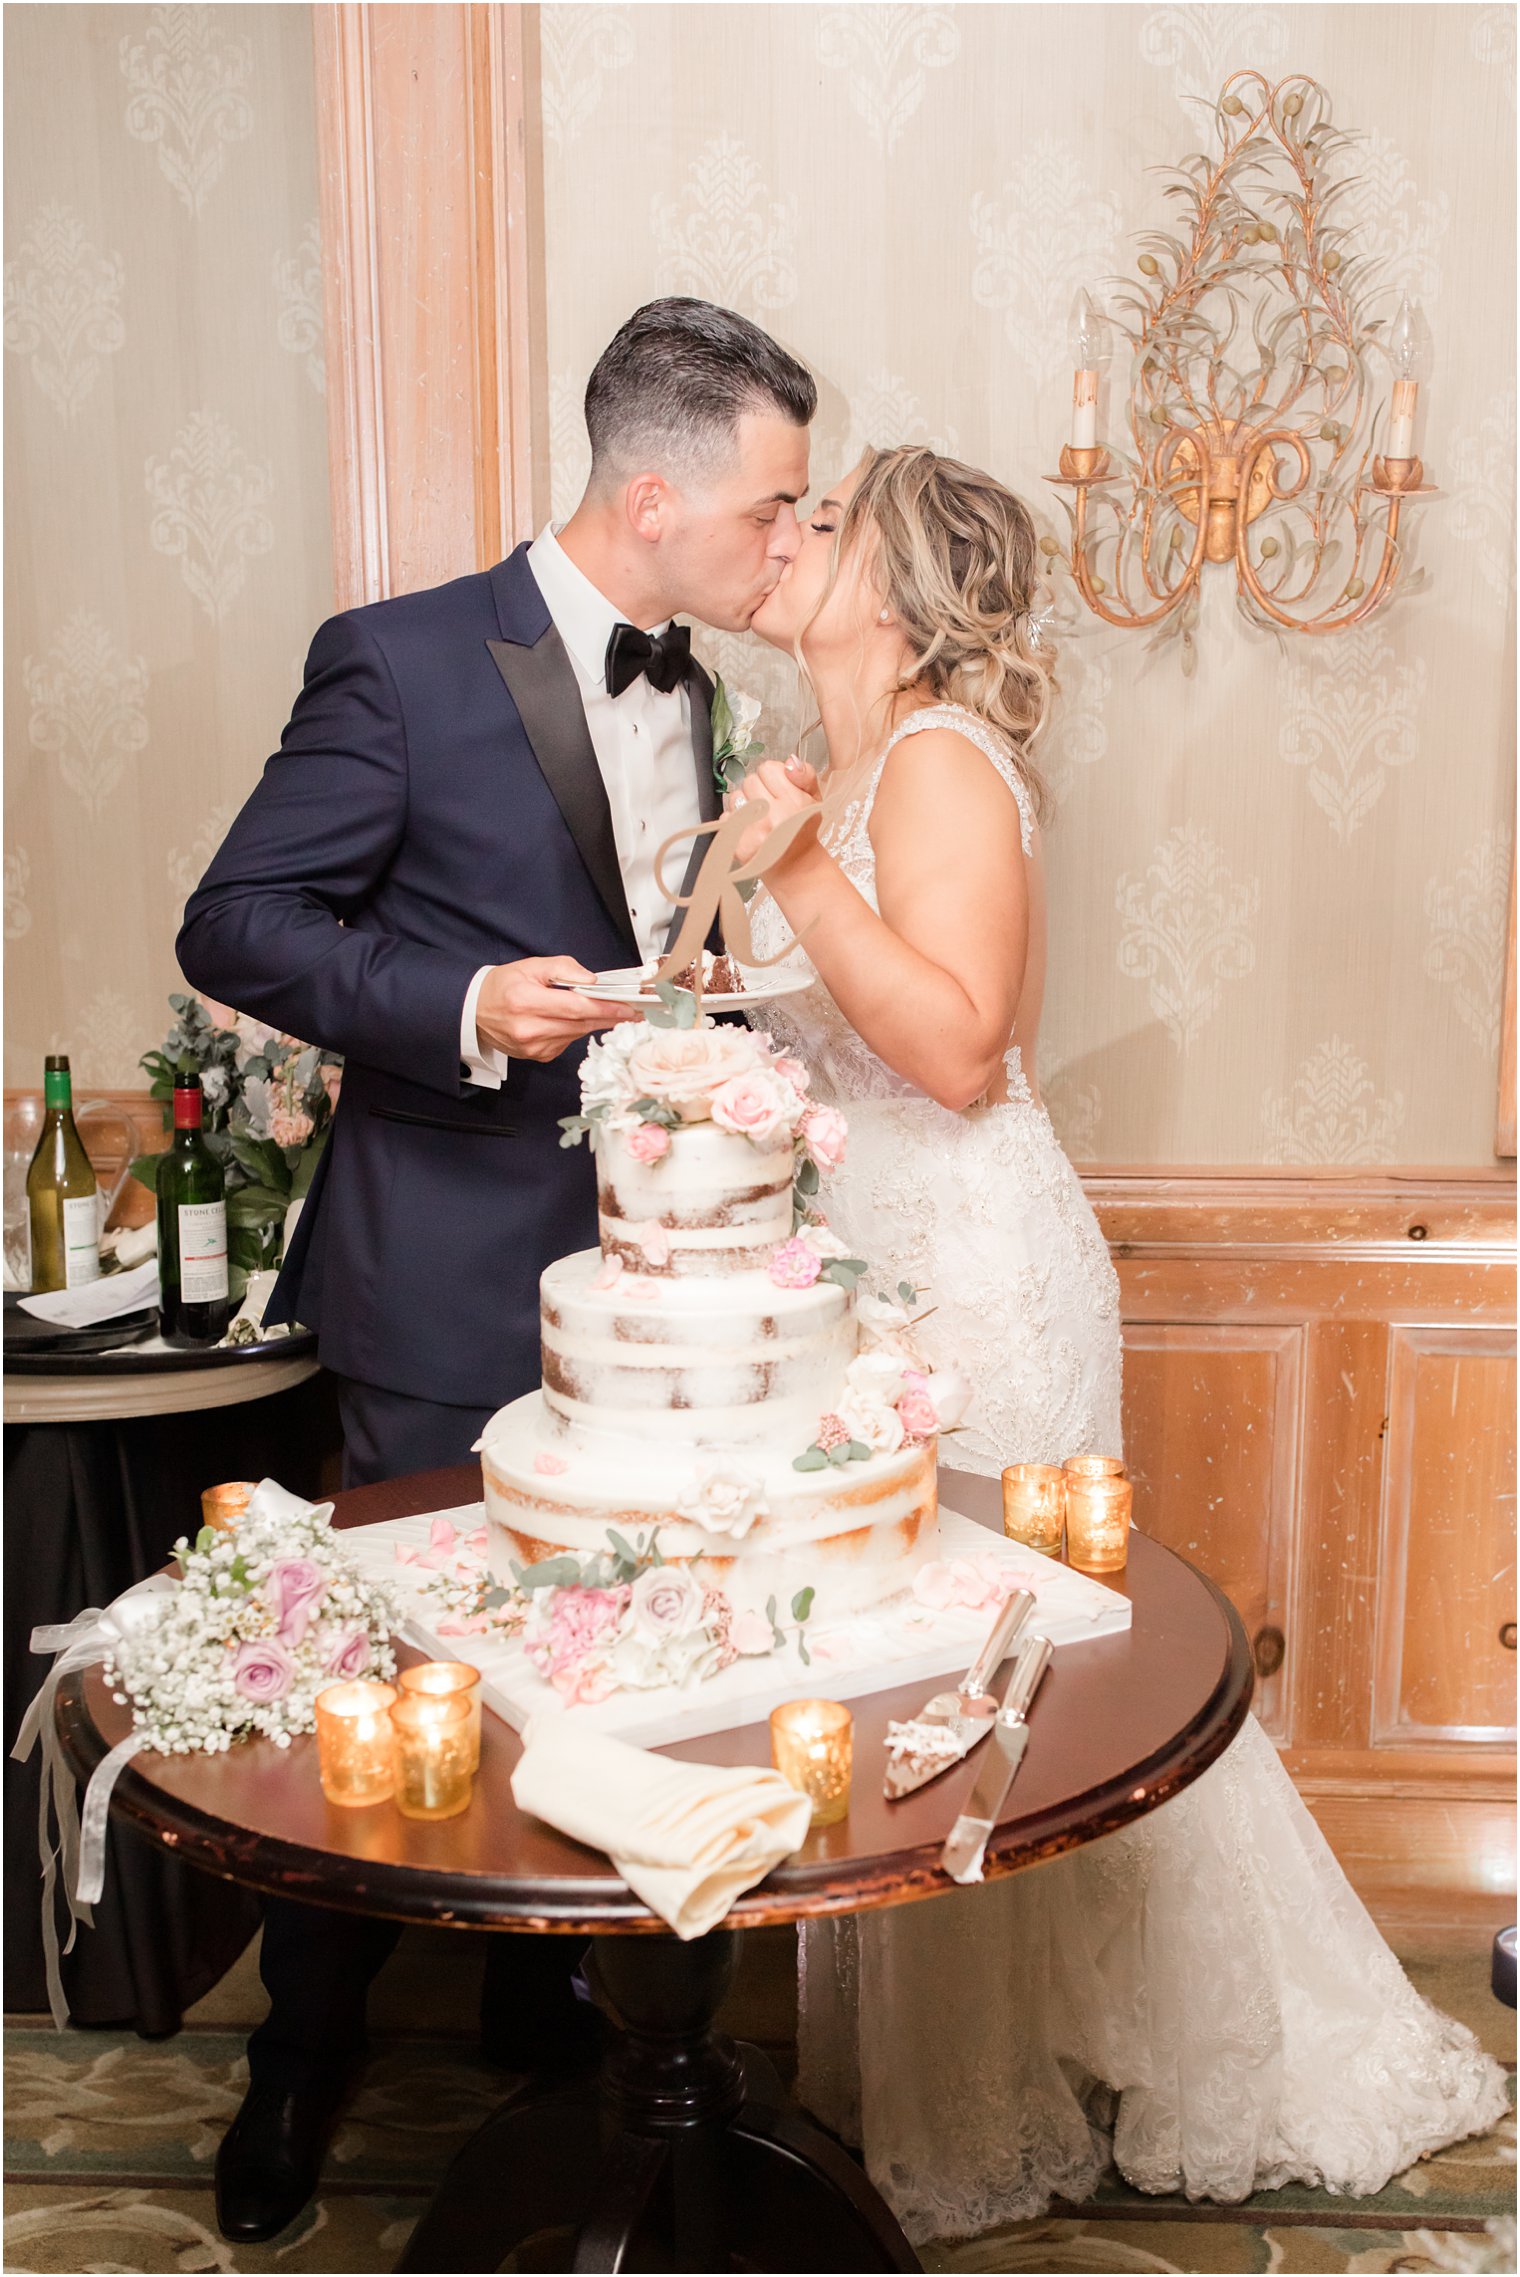 Cutting the wedding cake at the Grain House at the Olde Mill Inn in Basking Ridge, NJ